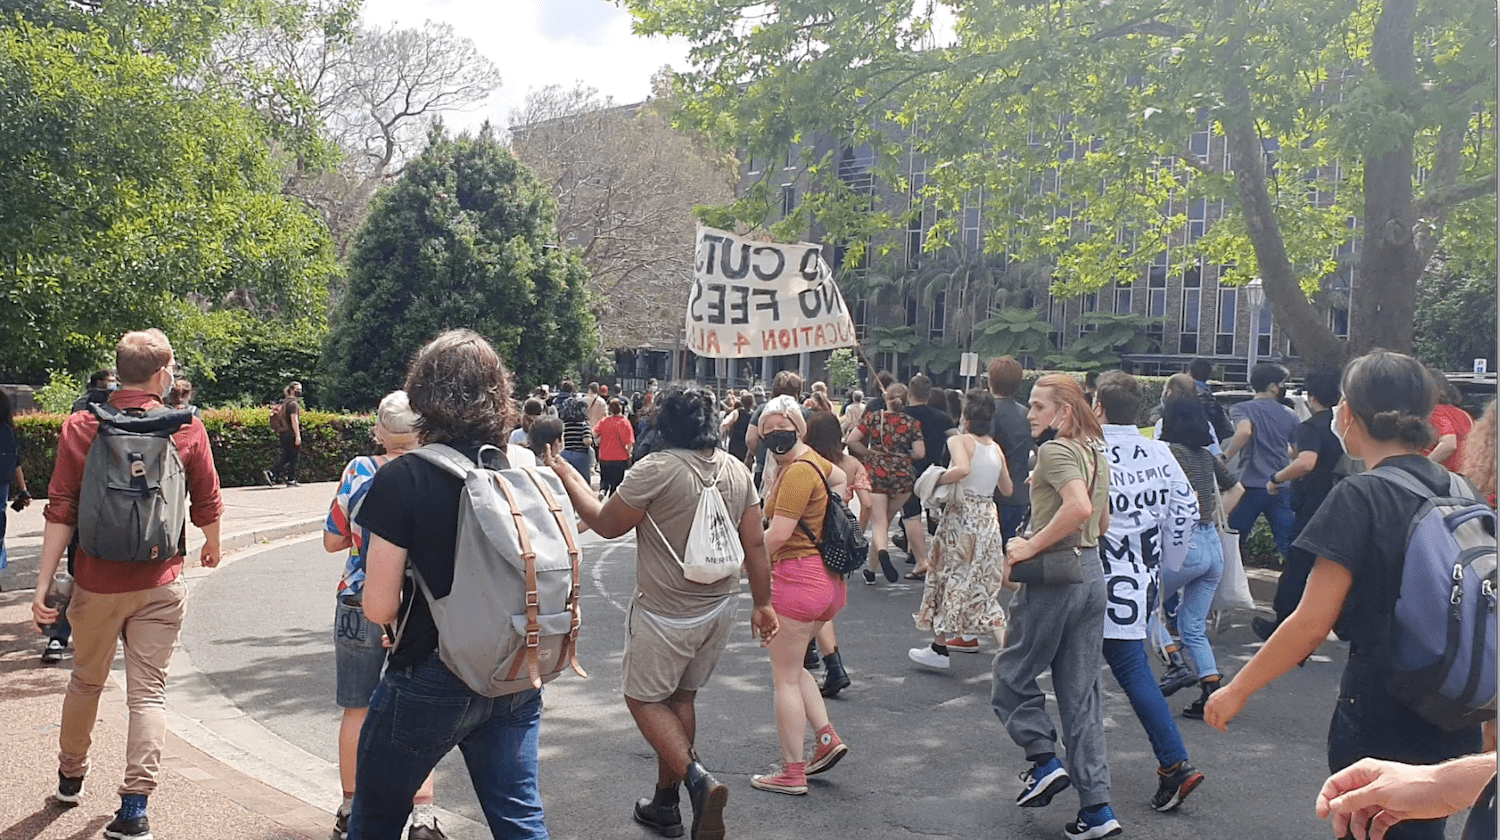 Police chase, brutalise students at education cuts protest - Honi Soit